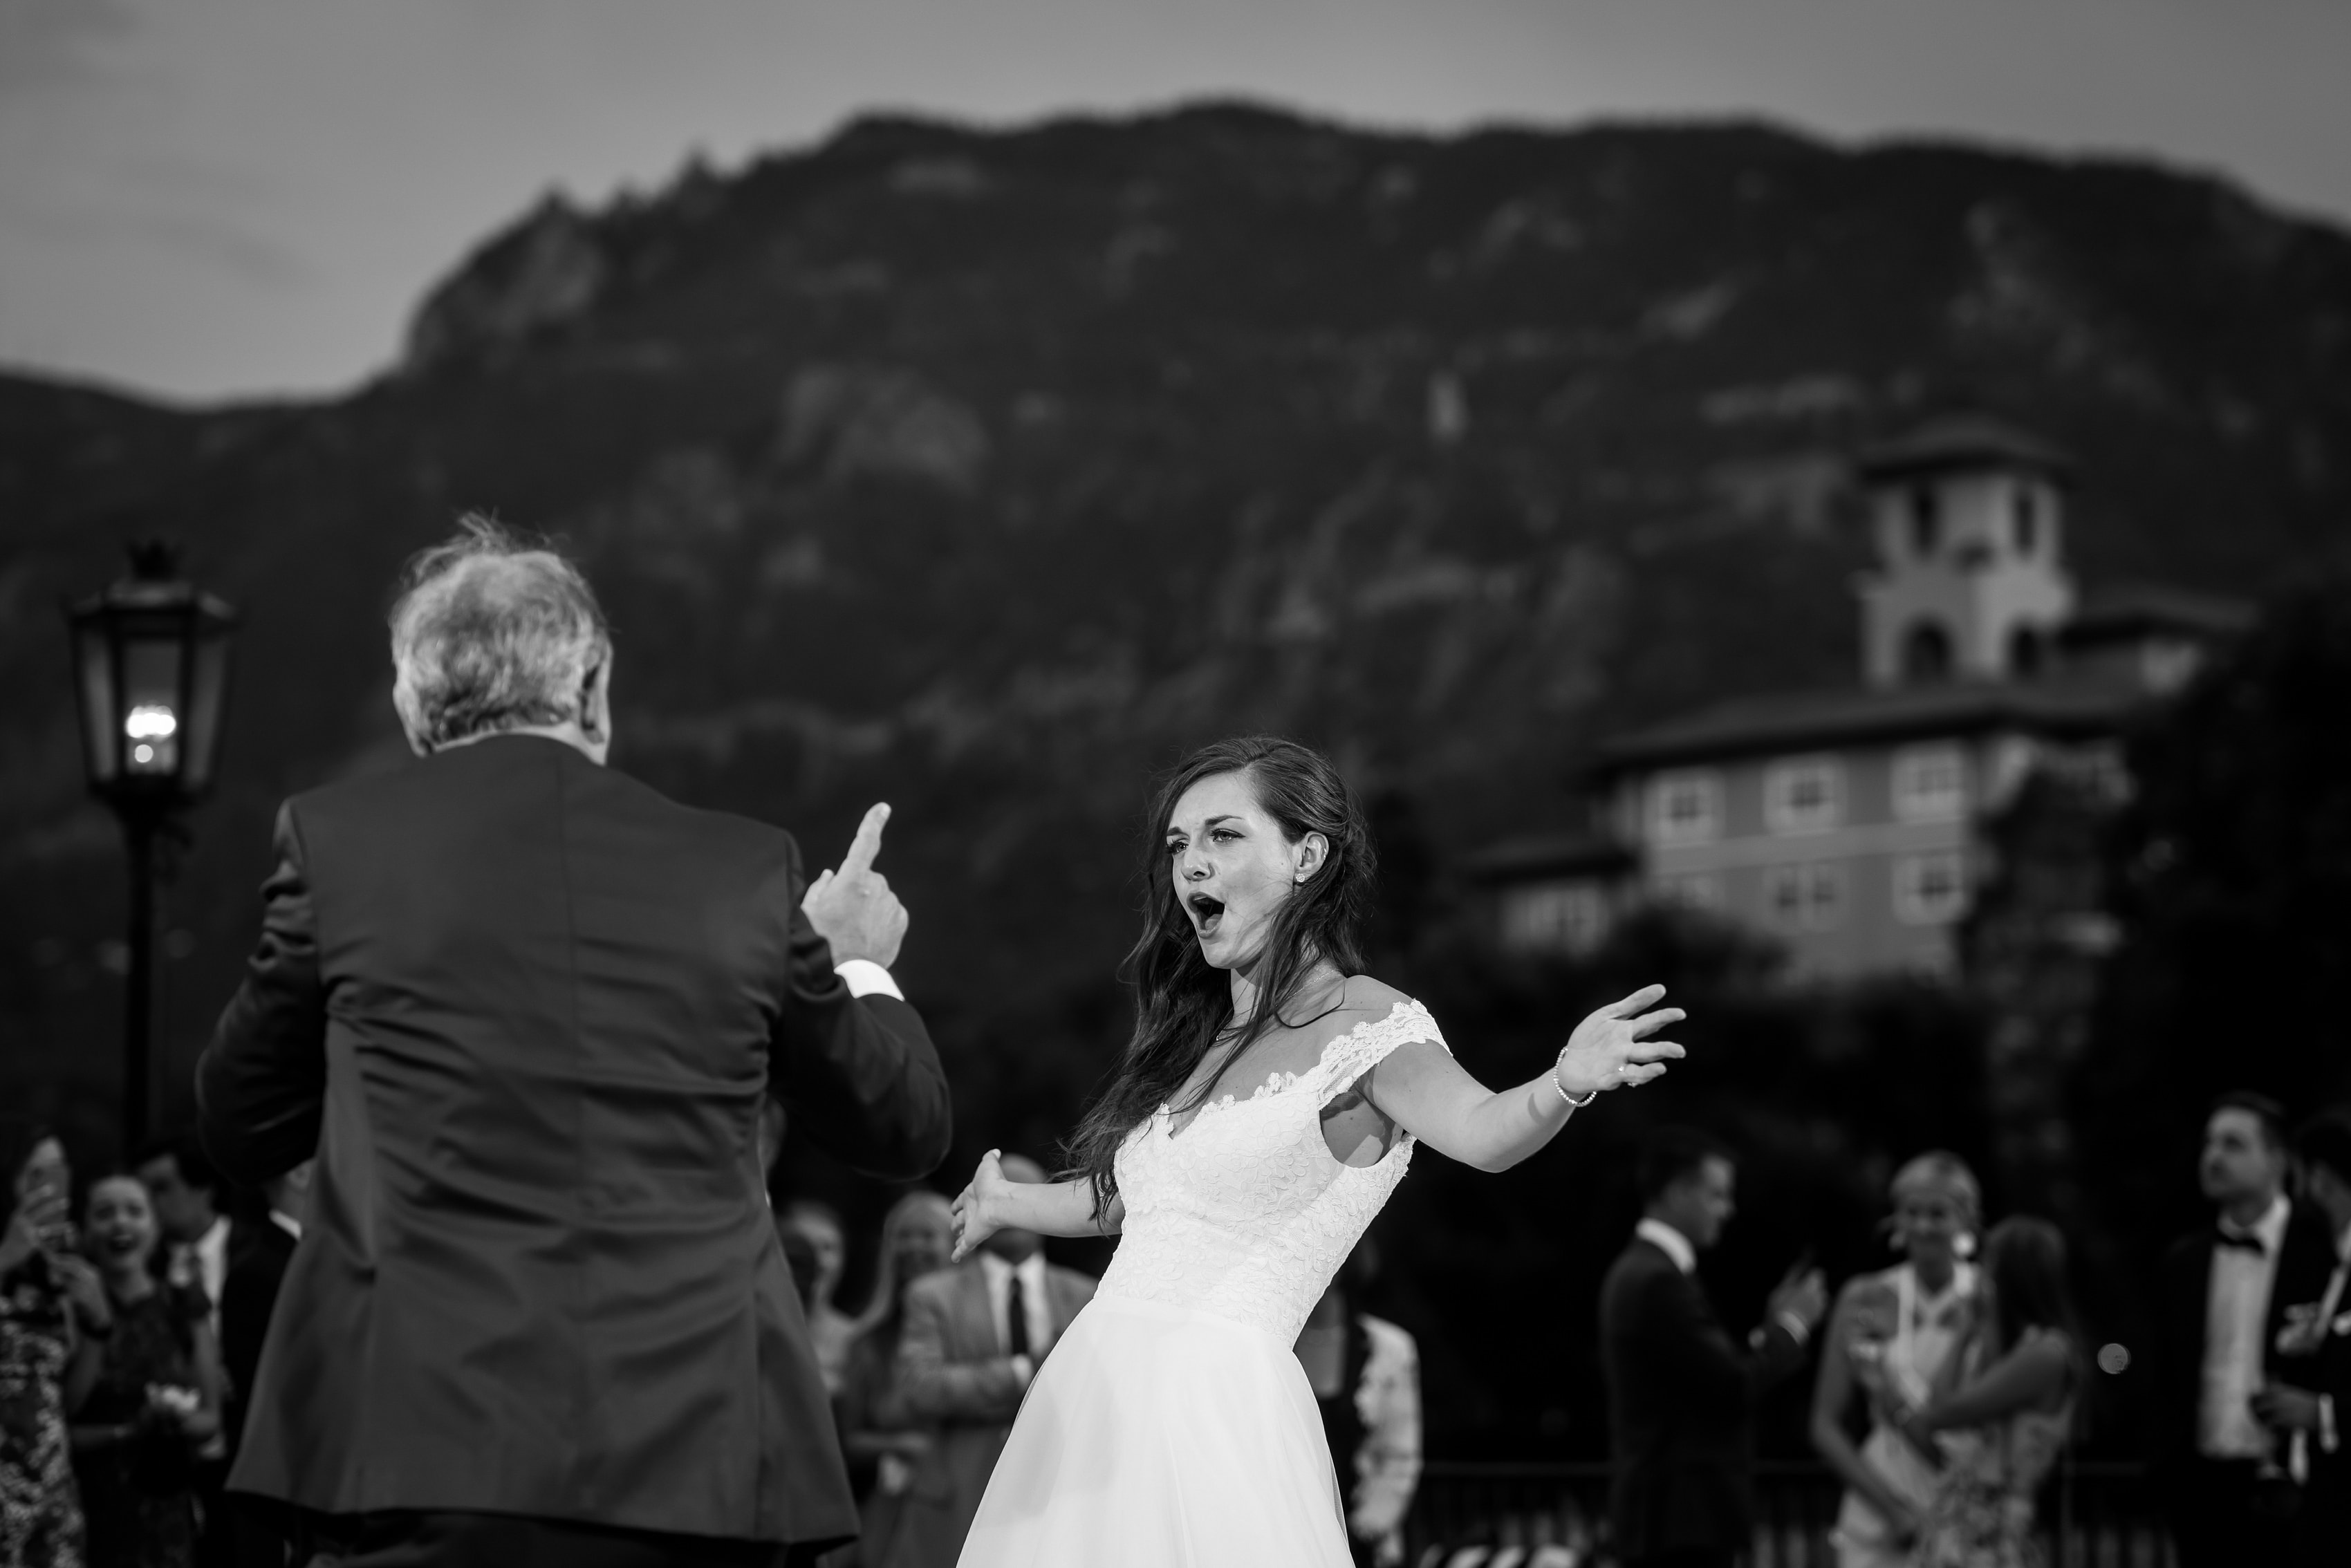 bride shares first dance with her father outdoors on the patio during wedding reception at The Broadmoor Hotel